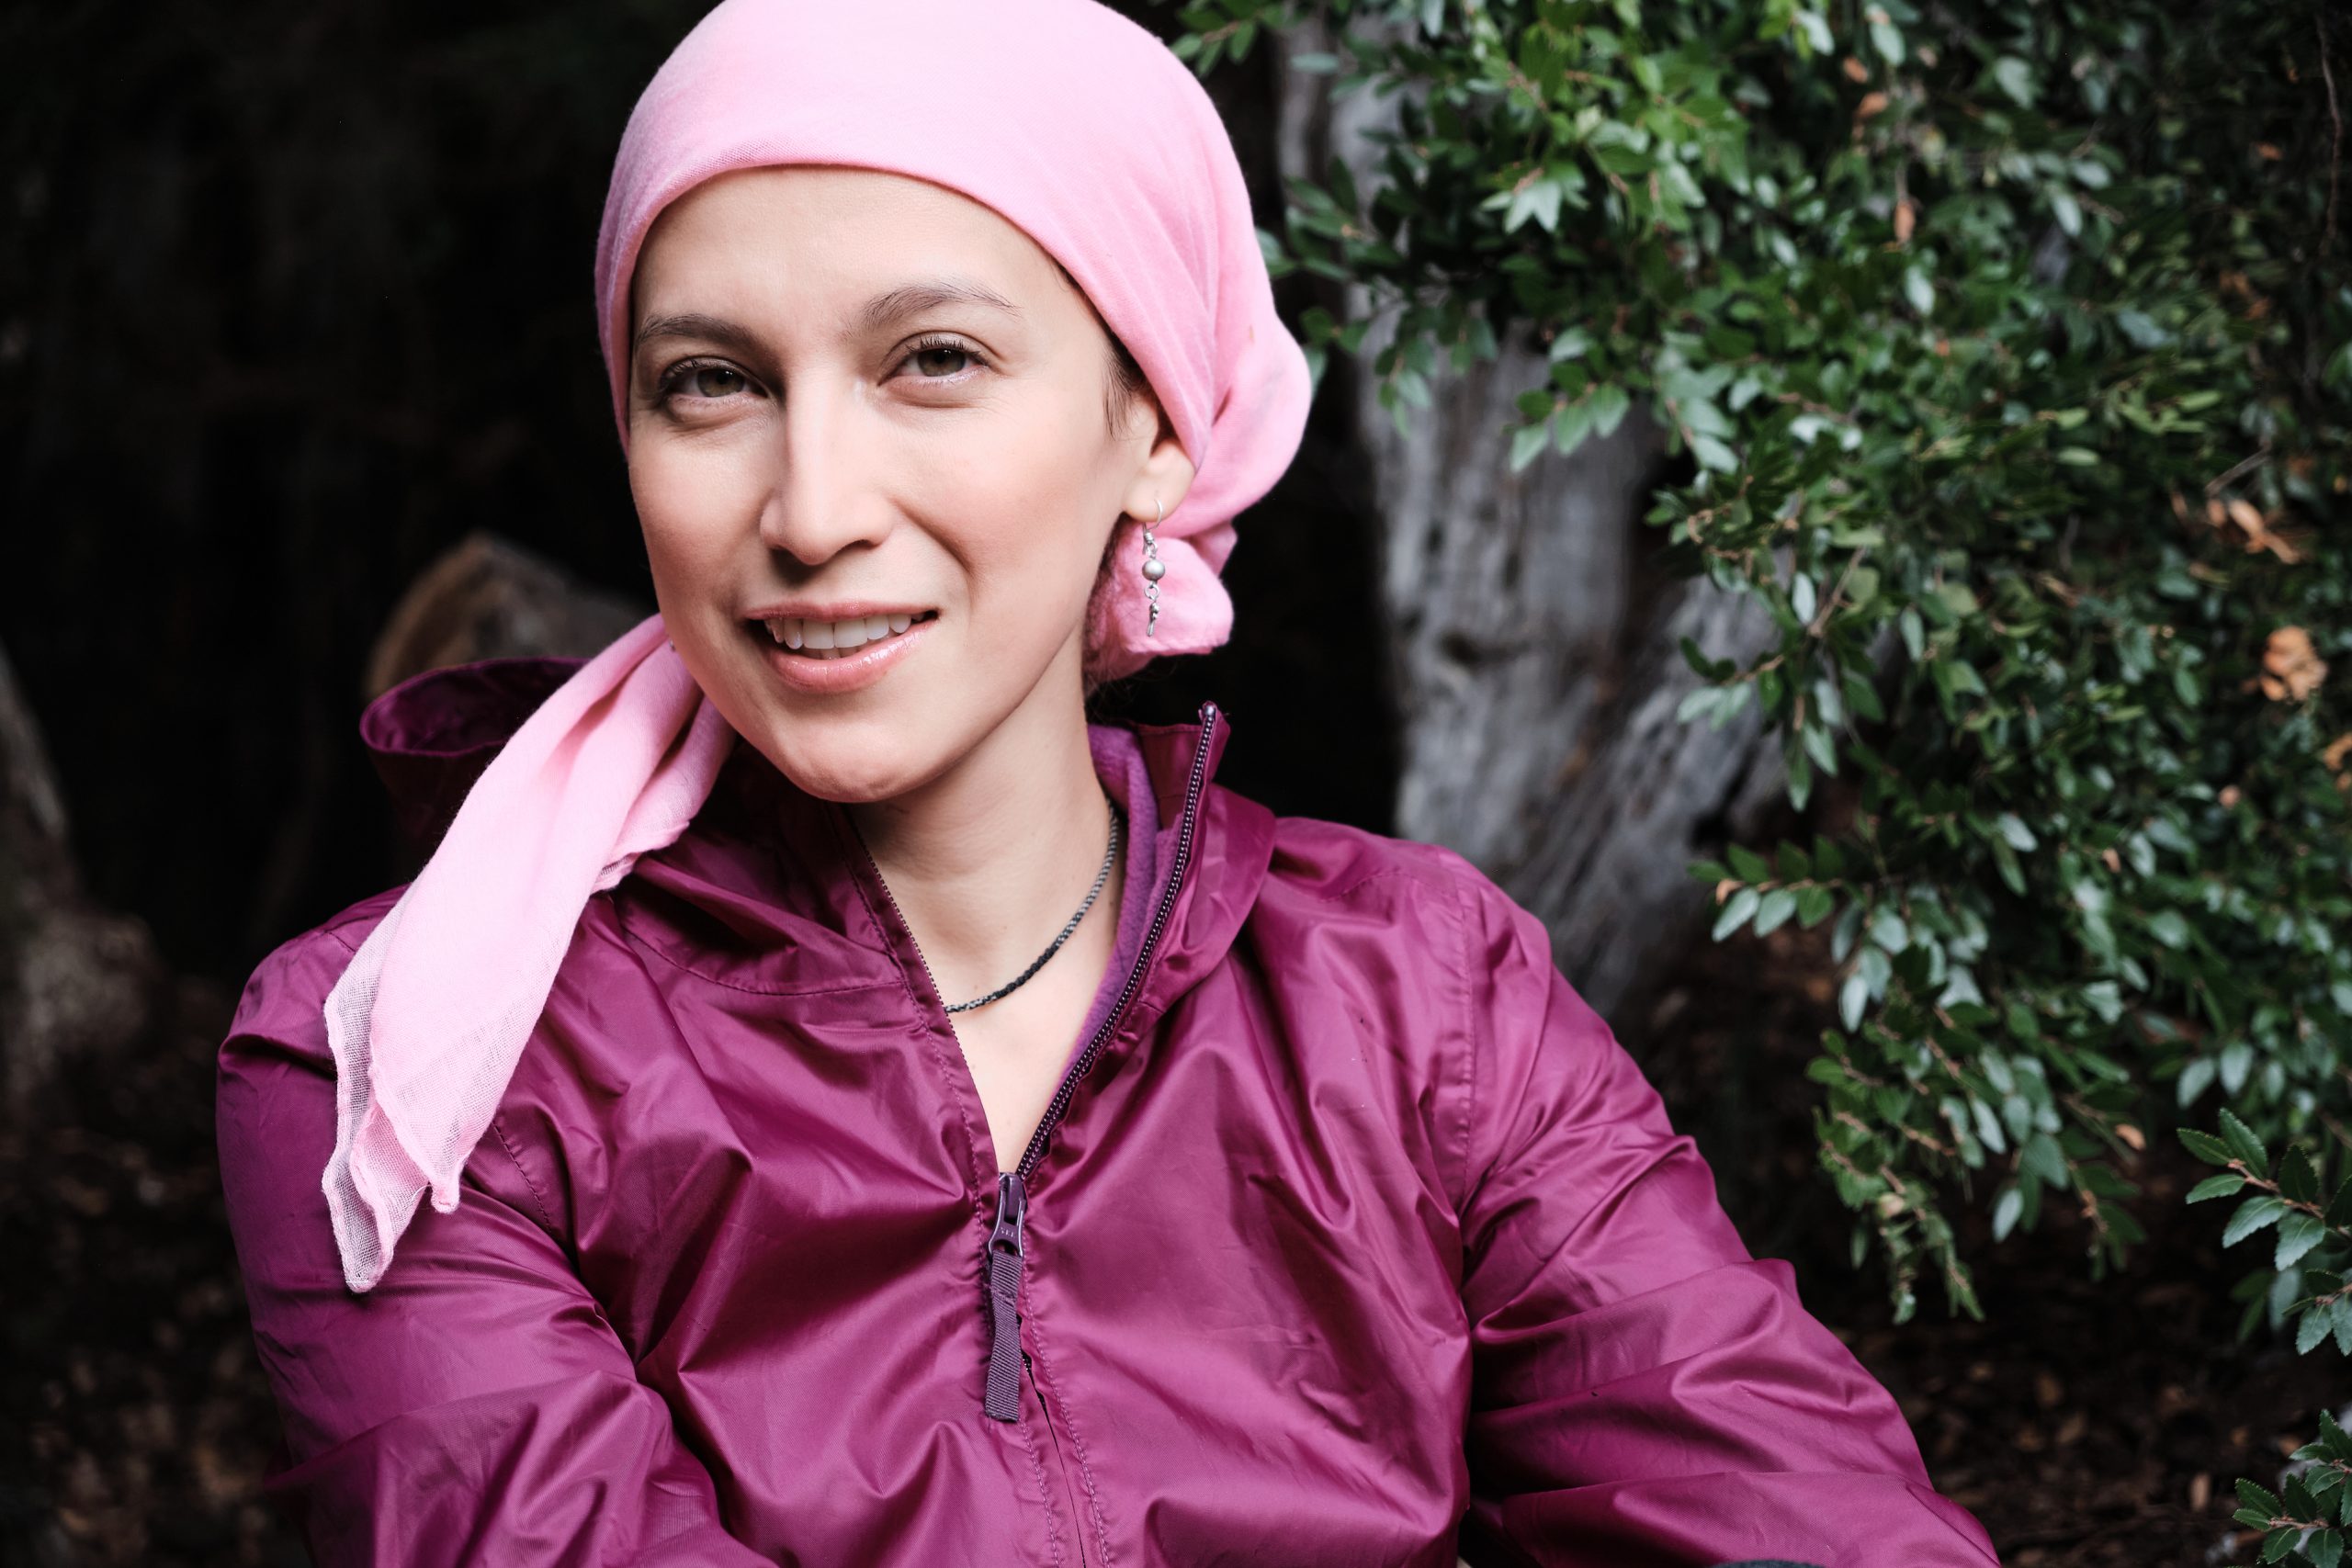 Portrait of young woman fighting cancer wearing a pink scarf